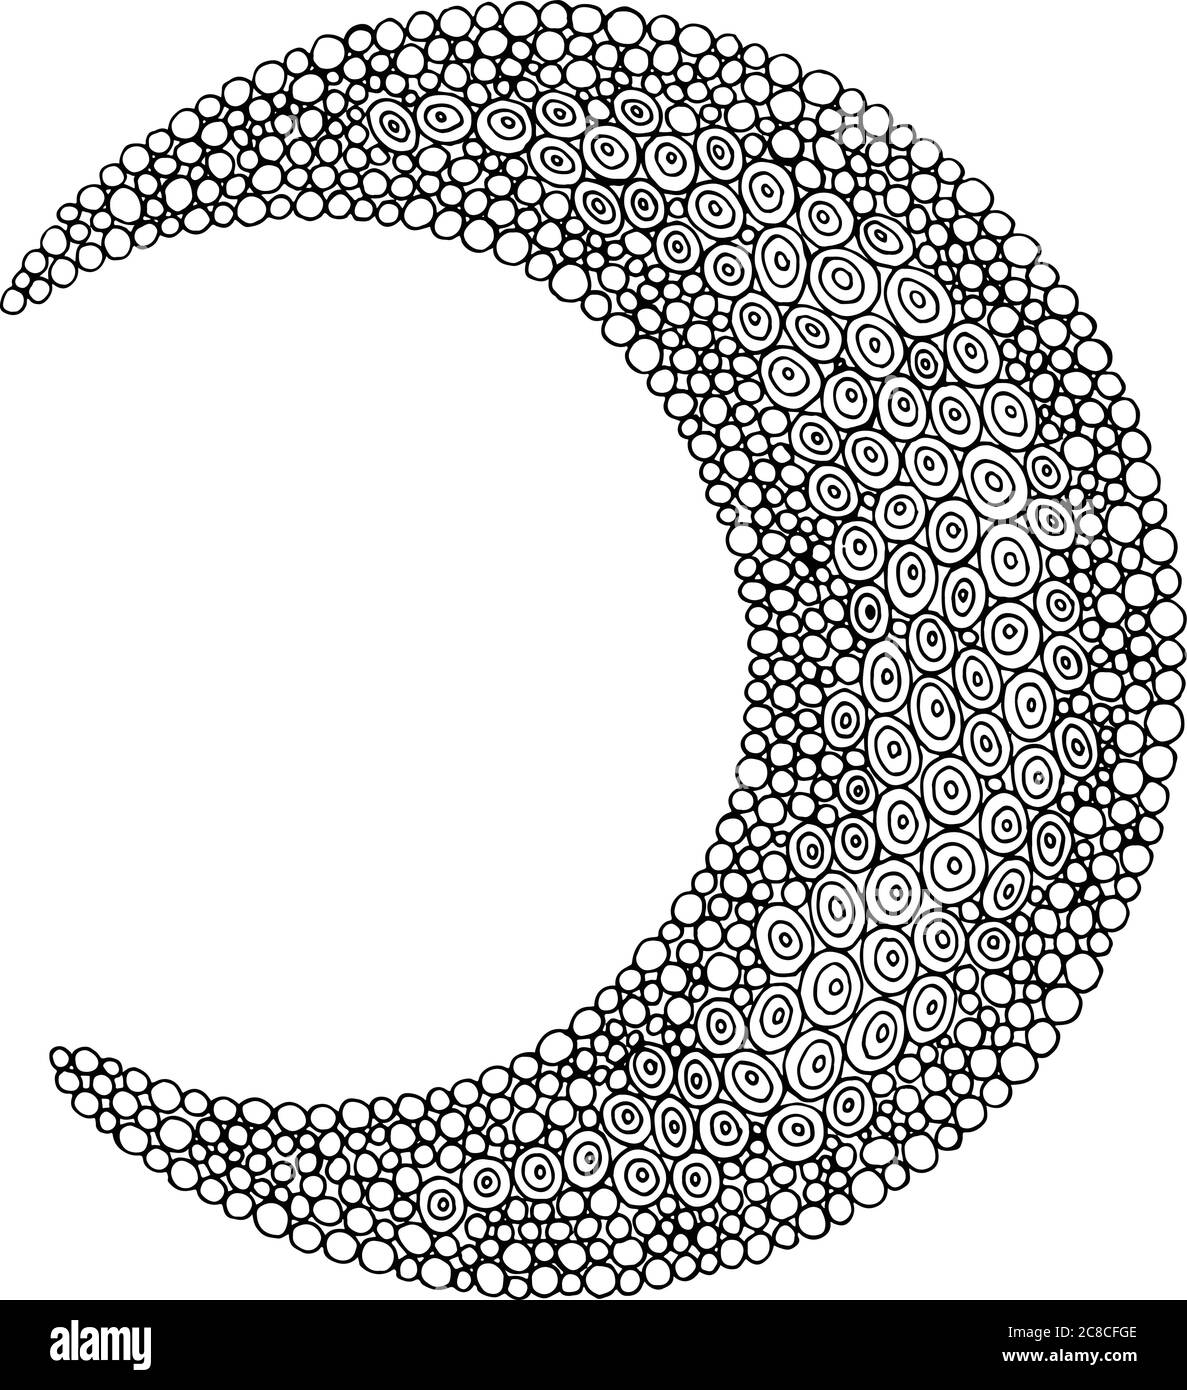 Doodle moon - coloring page for adults and children. Circle orna Stock ...